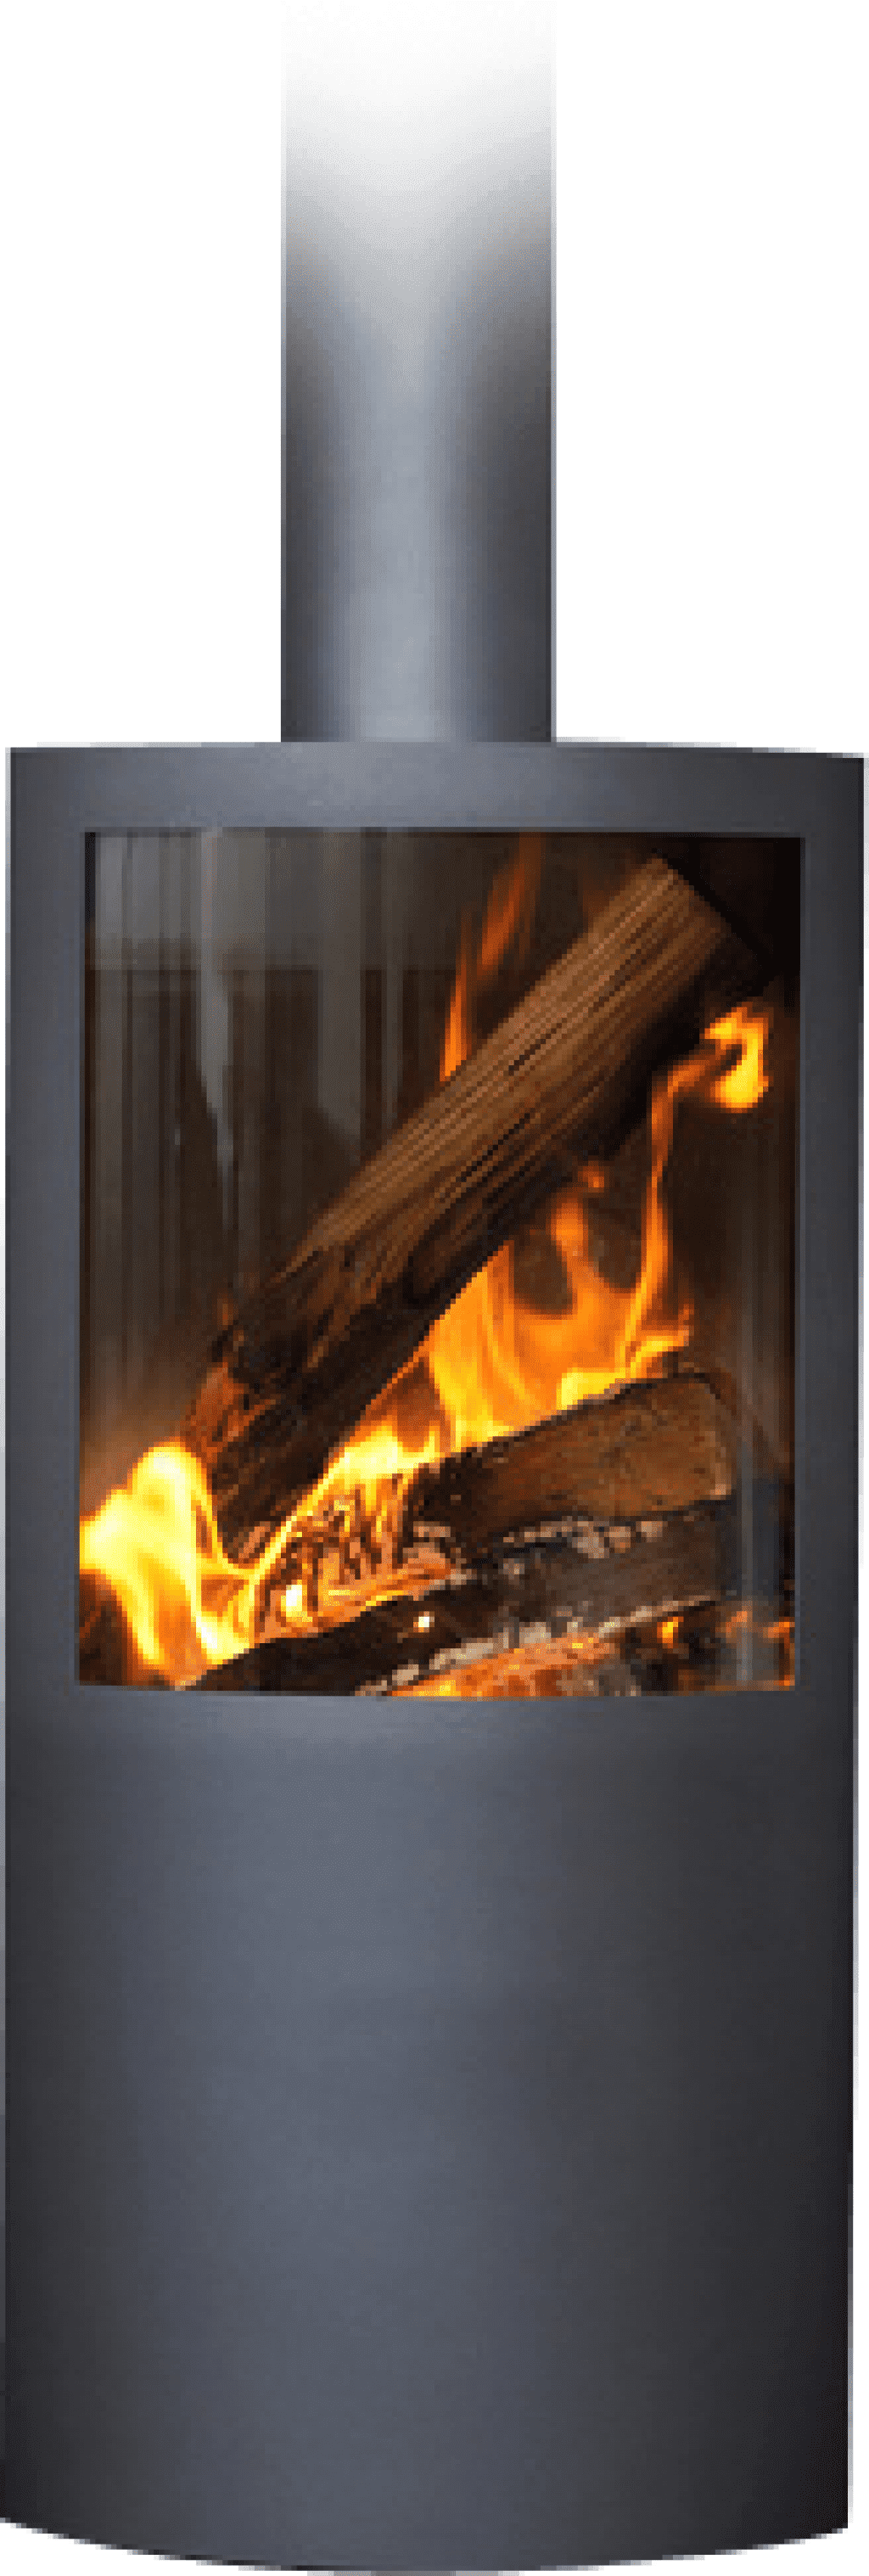 Blog - A potbelly stove - what is it?